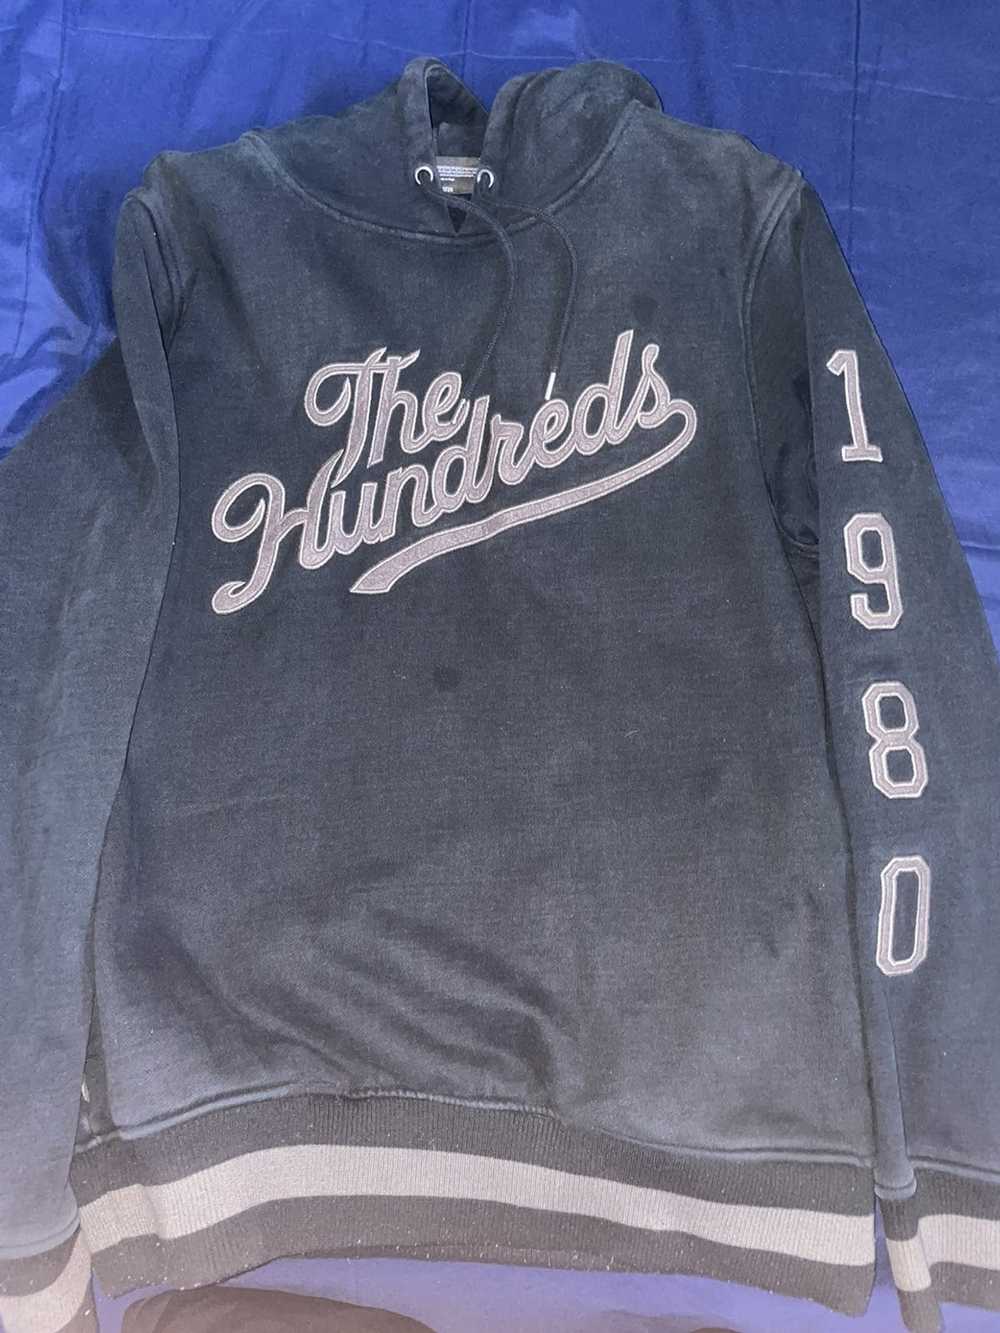 Streetwear × The Hundreds The Hundreds hoodie - image 3